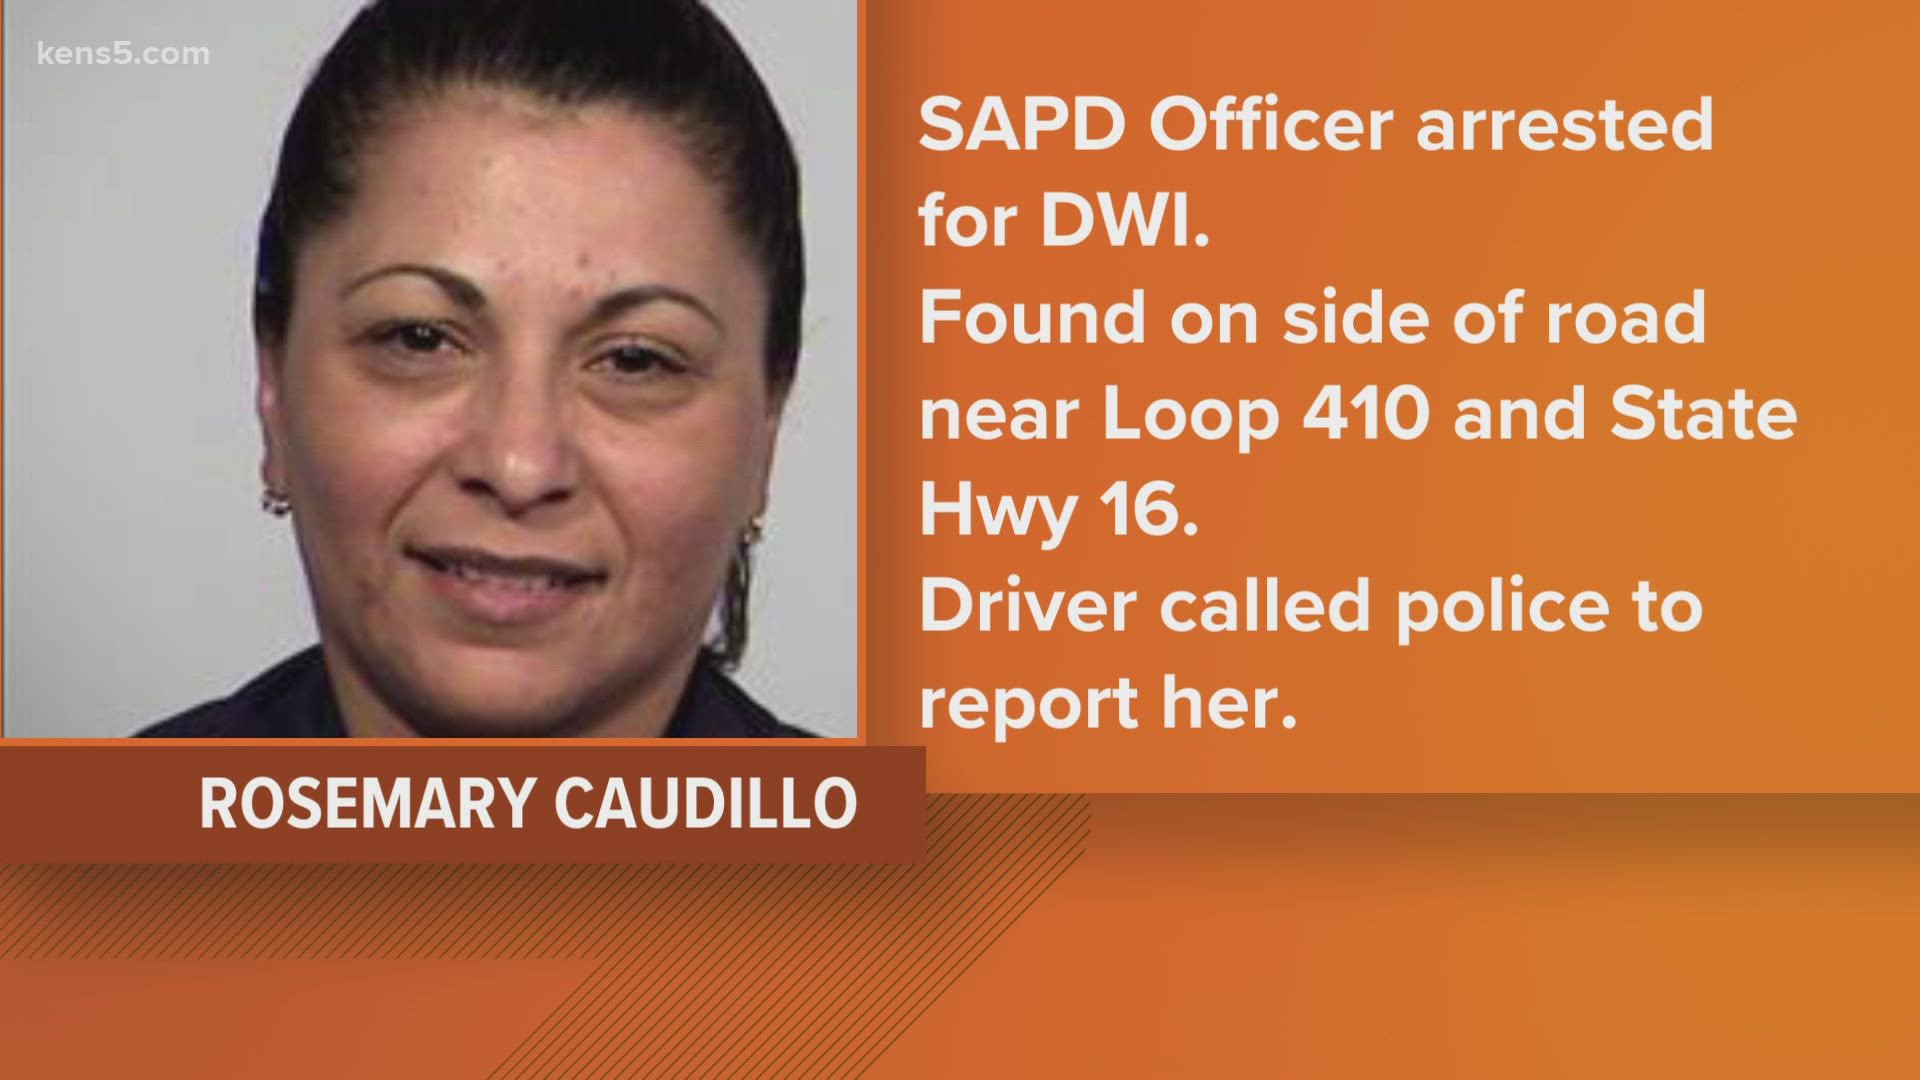 According to police, Rosemary Caudillo, who has been with SAPD for 17 years, was found on the side of the road near Loop 410 and State Highway 16 while off-duty.